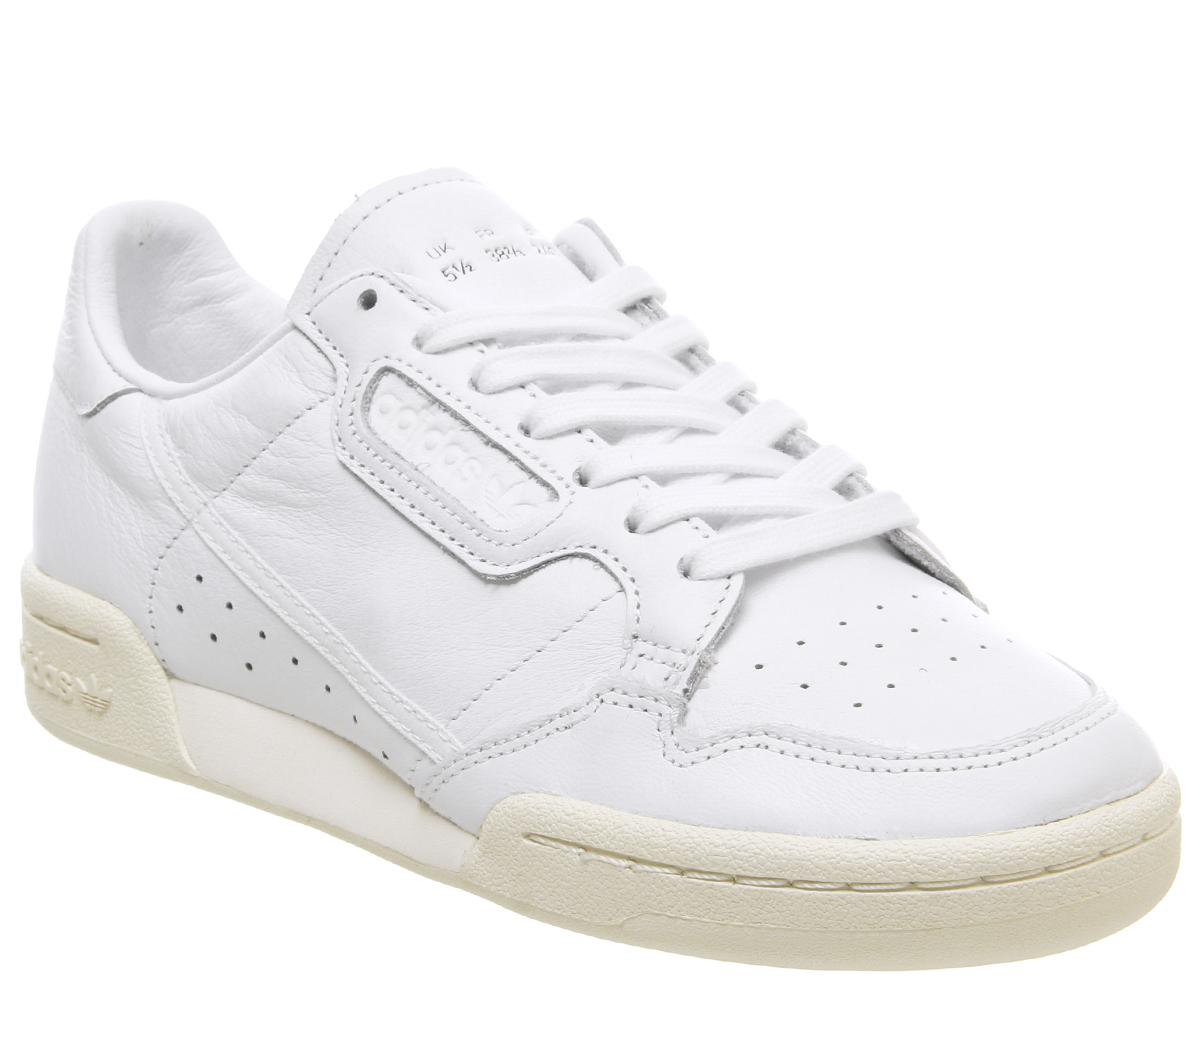 adidas originals continental 80s trainers in off white